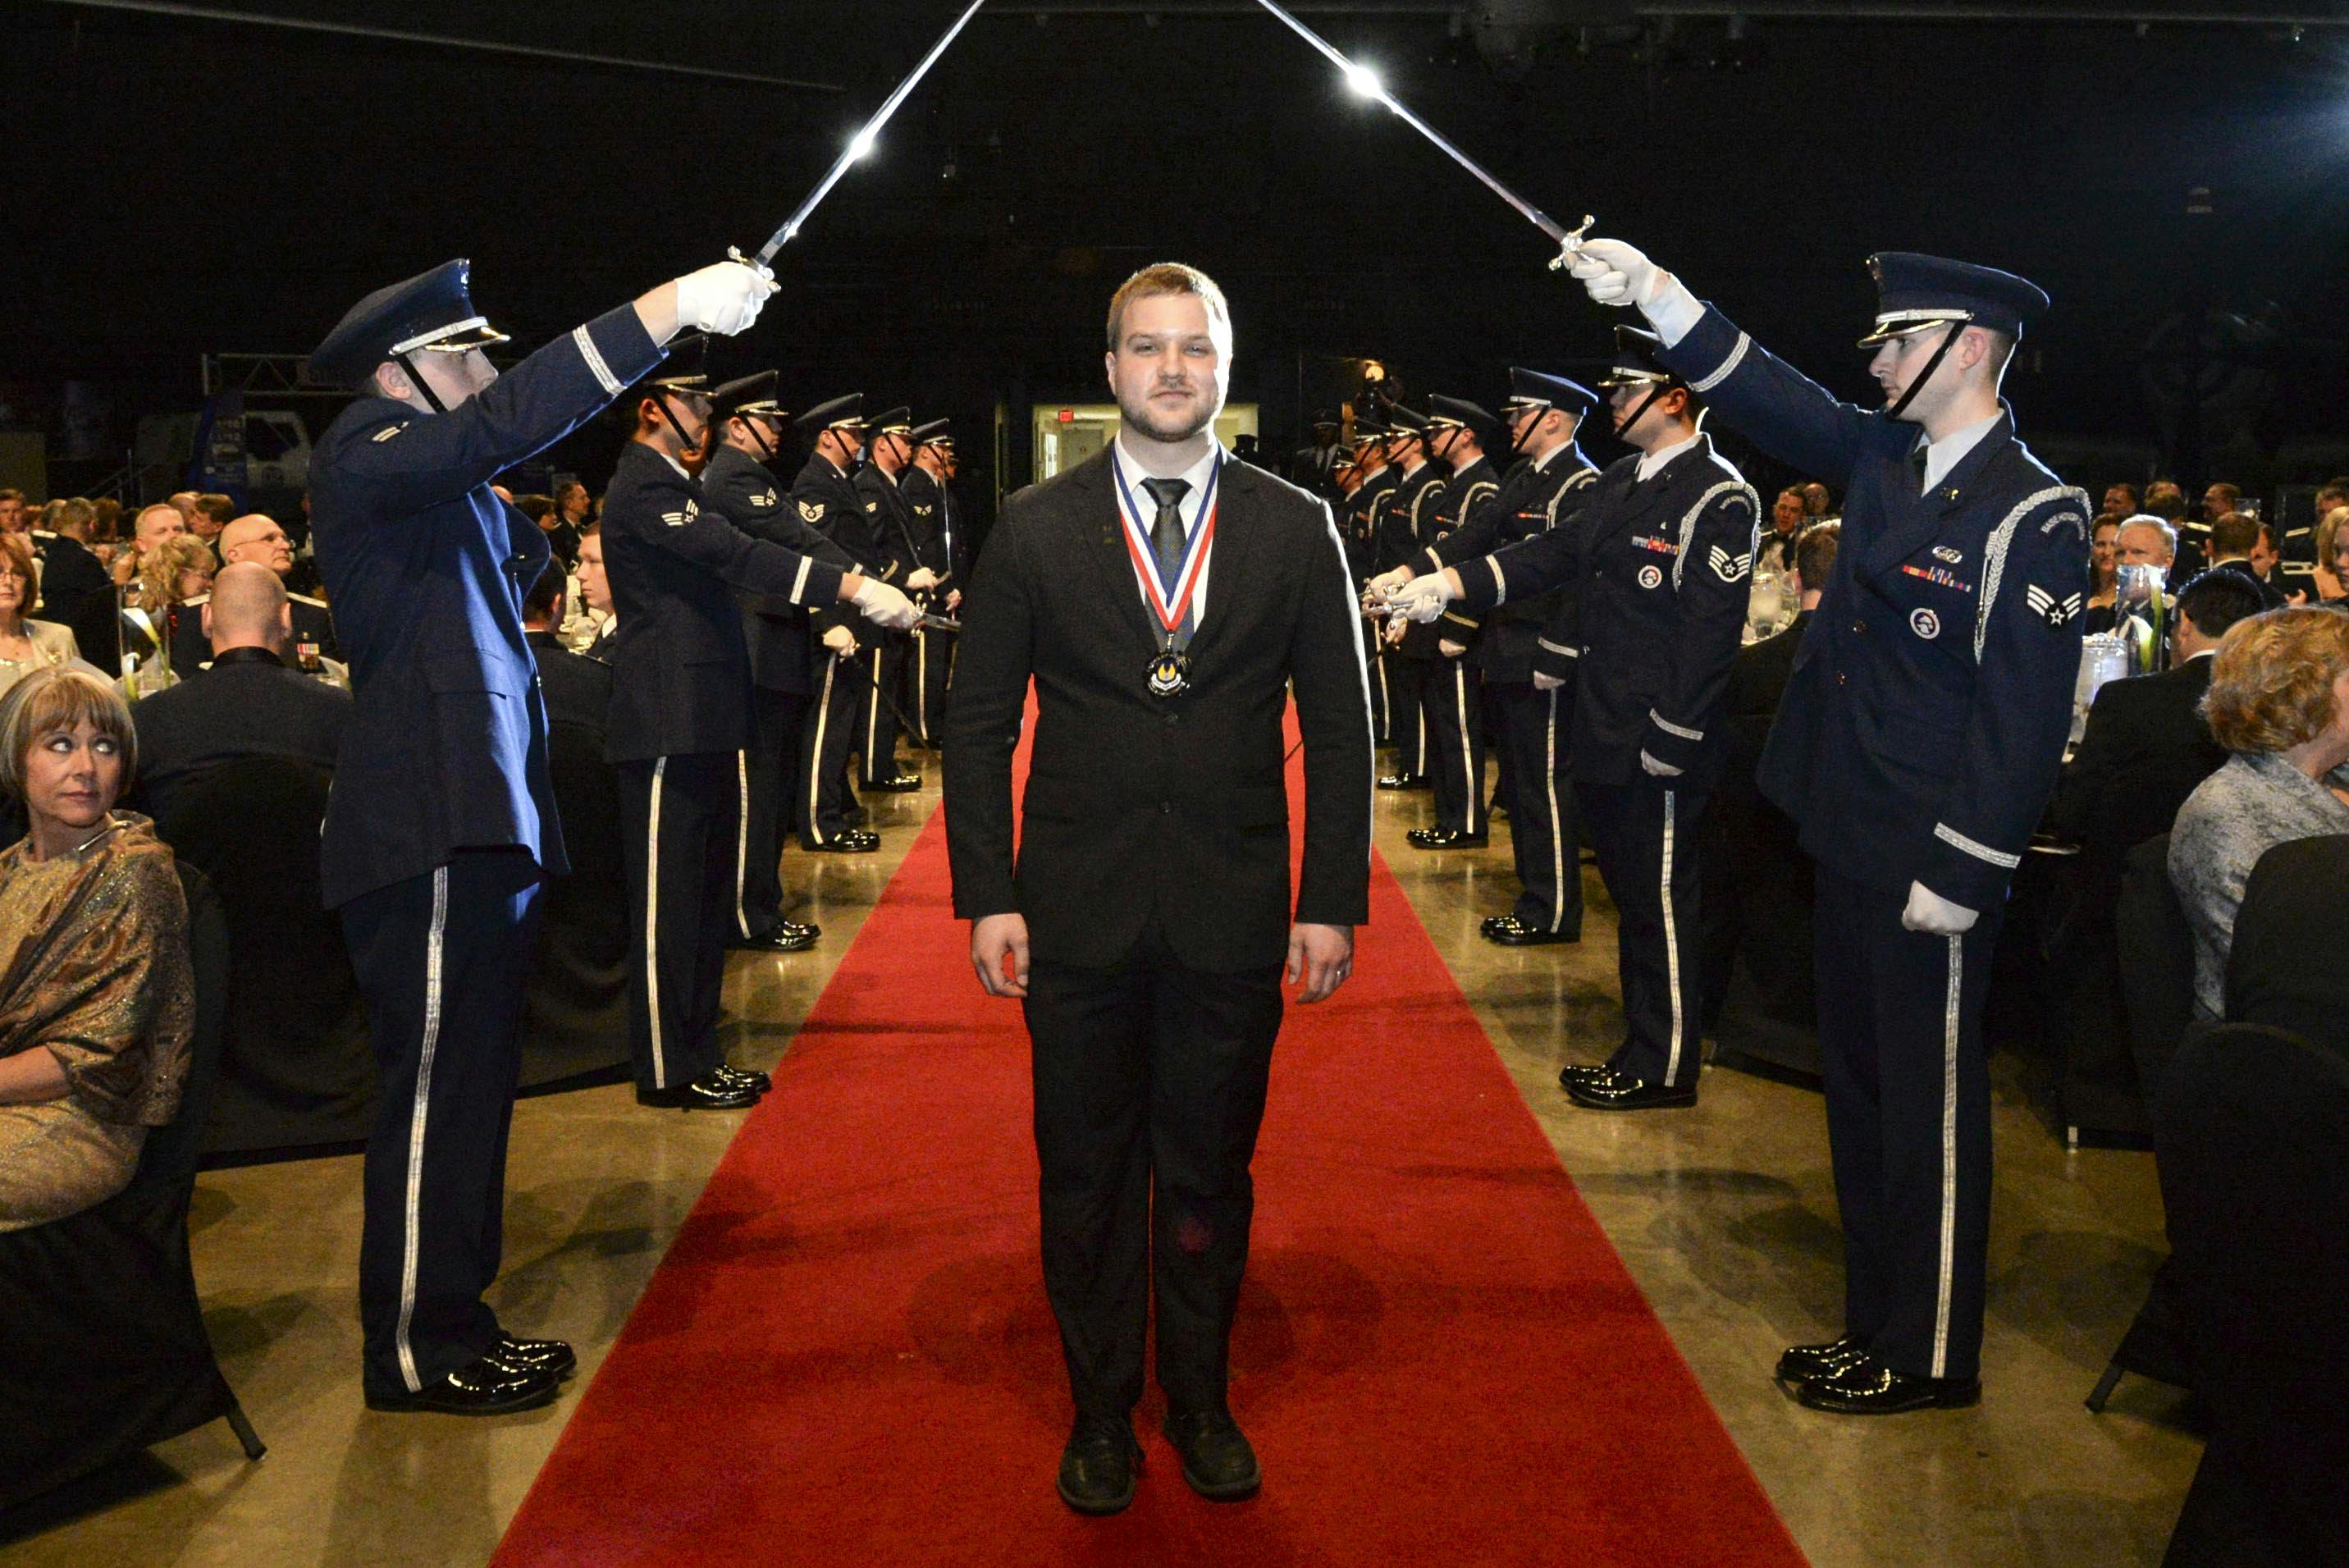 Ty Mick, wearing a medal featuring the AFMC logo, walking on a red carpet between Airmen holding swords at the 2014 AFMC Annual Excellents Awards.